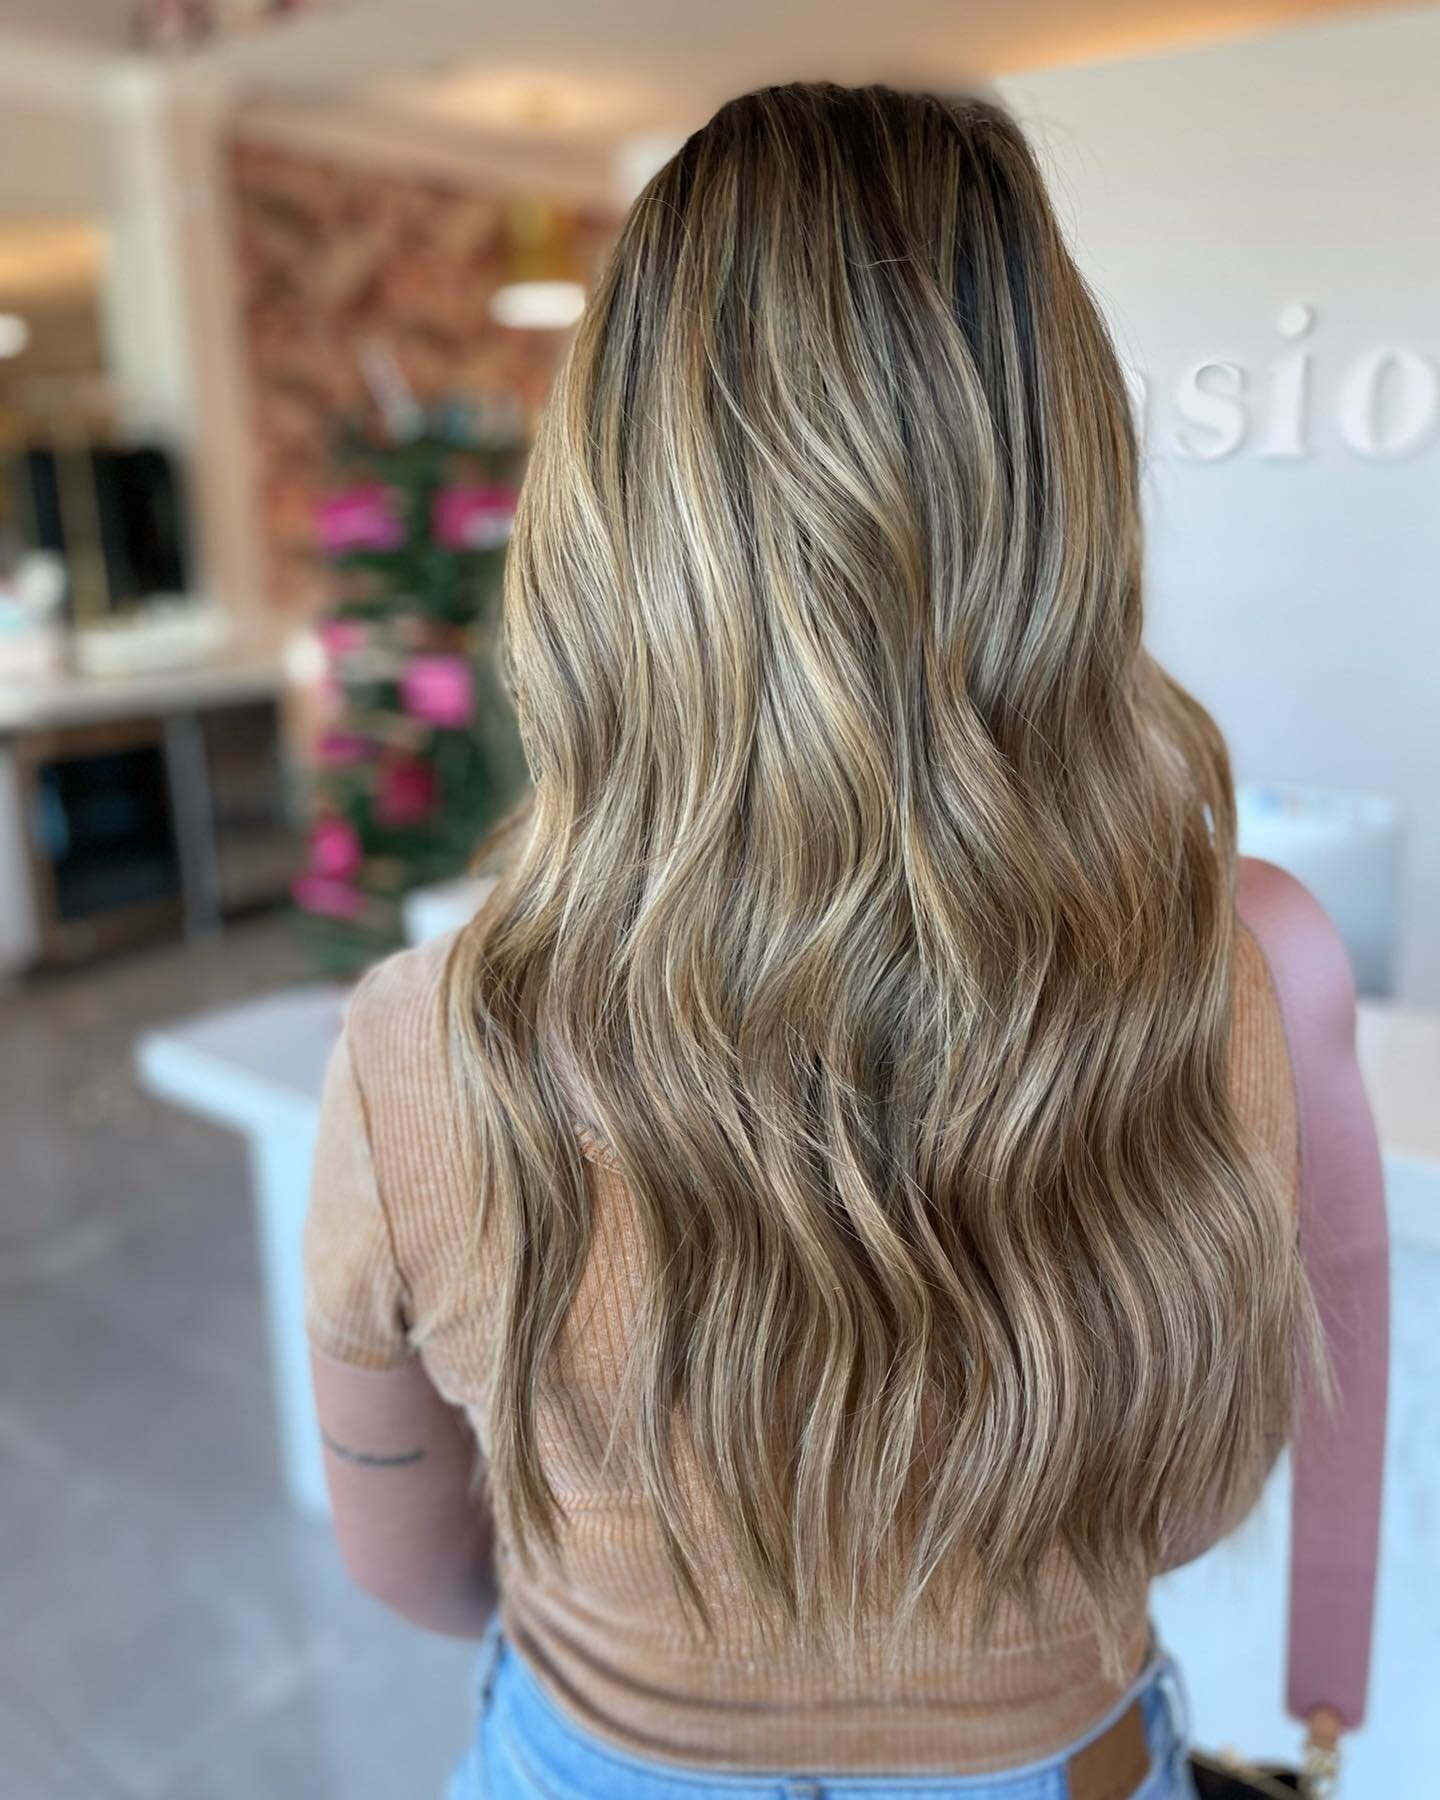 The power of quality extensions and a skilled extensionist. ✨✨ SWIPE FOR THE BEFORE. Hair by @taylor.extensionbar 
⁣
Book online by visiting extensionbar.com/book. ⁣
⁣
#extensionbar #extensionbaraz